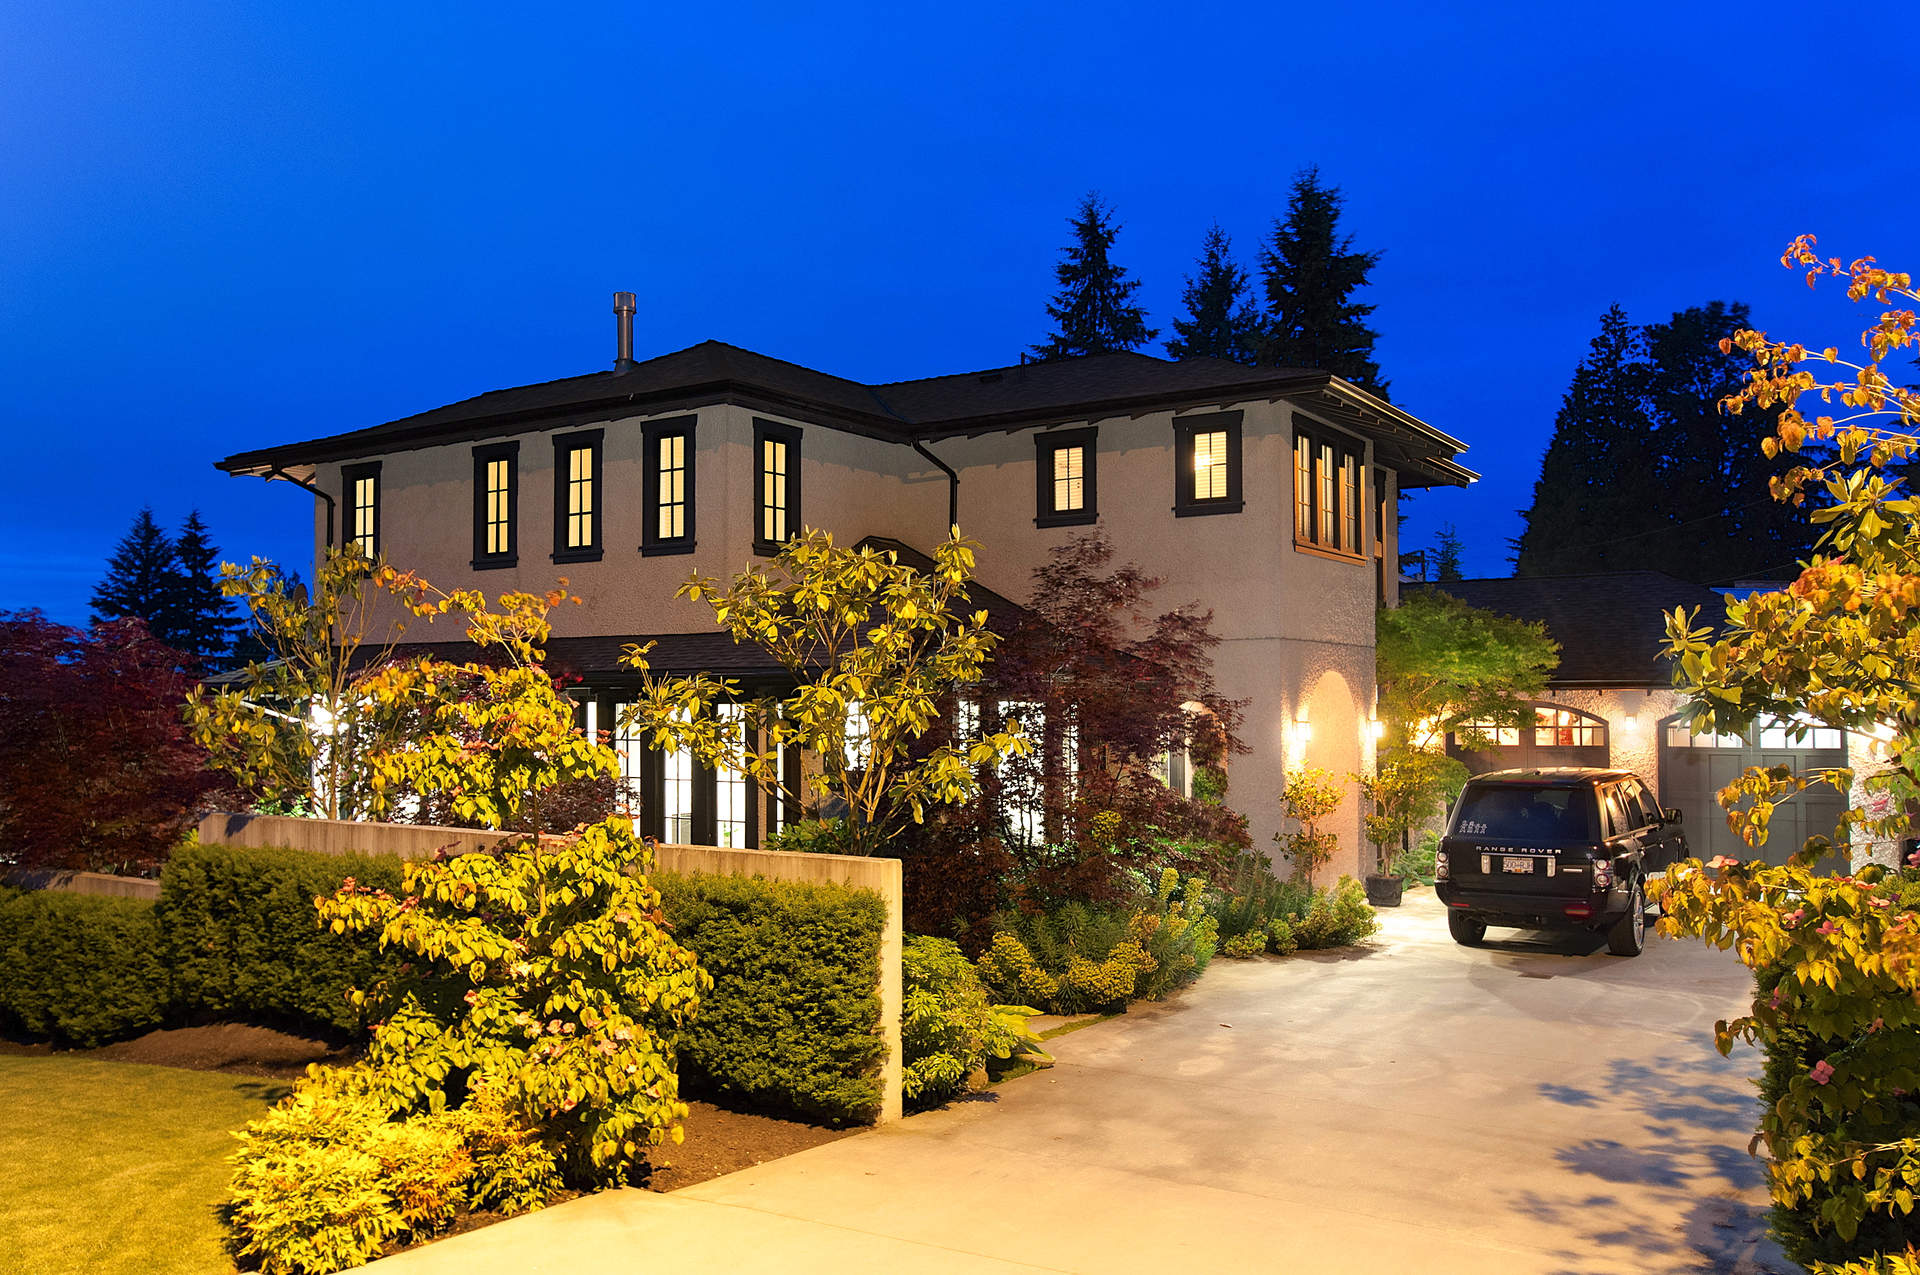 INCREDIBLE VALUE for this Spectacular Edgemont Residence